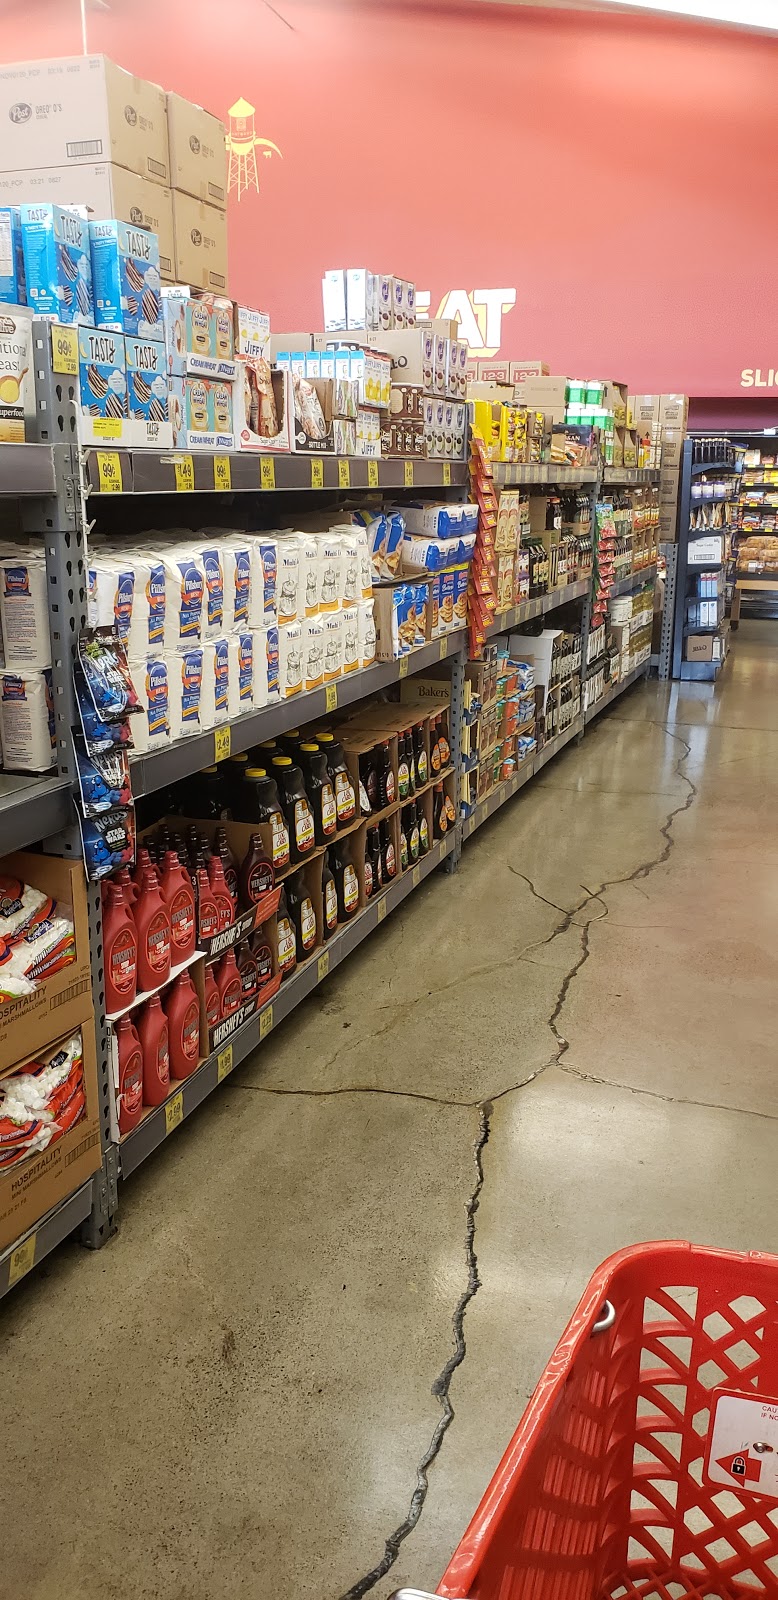 Grocery Outlet | 22660 Vermont St, Hayward, CA 94541 | Phone: (510) 881-8020